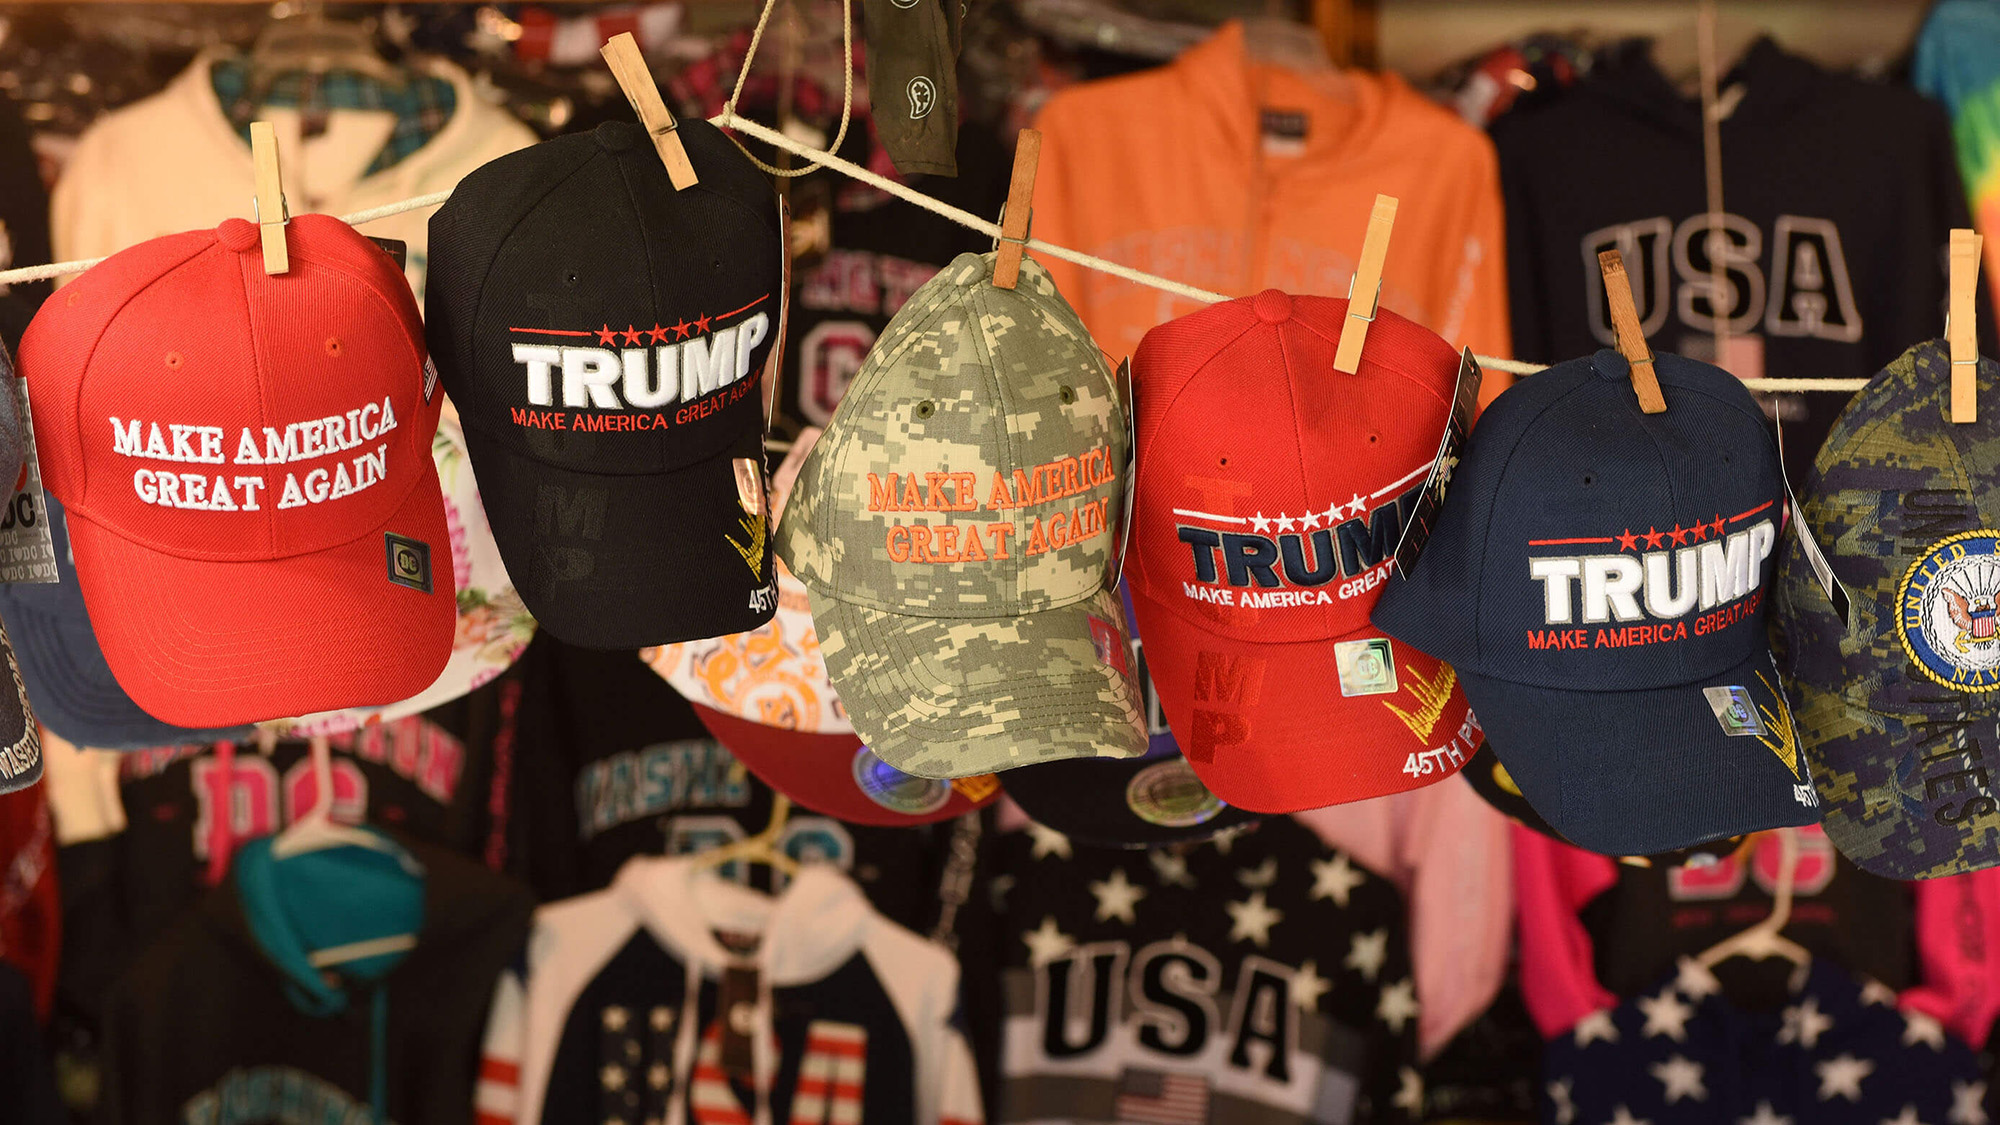 Trump hats hanging on a clothesline.